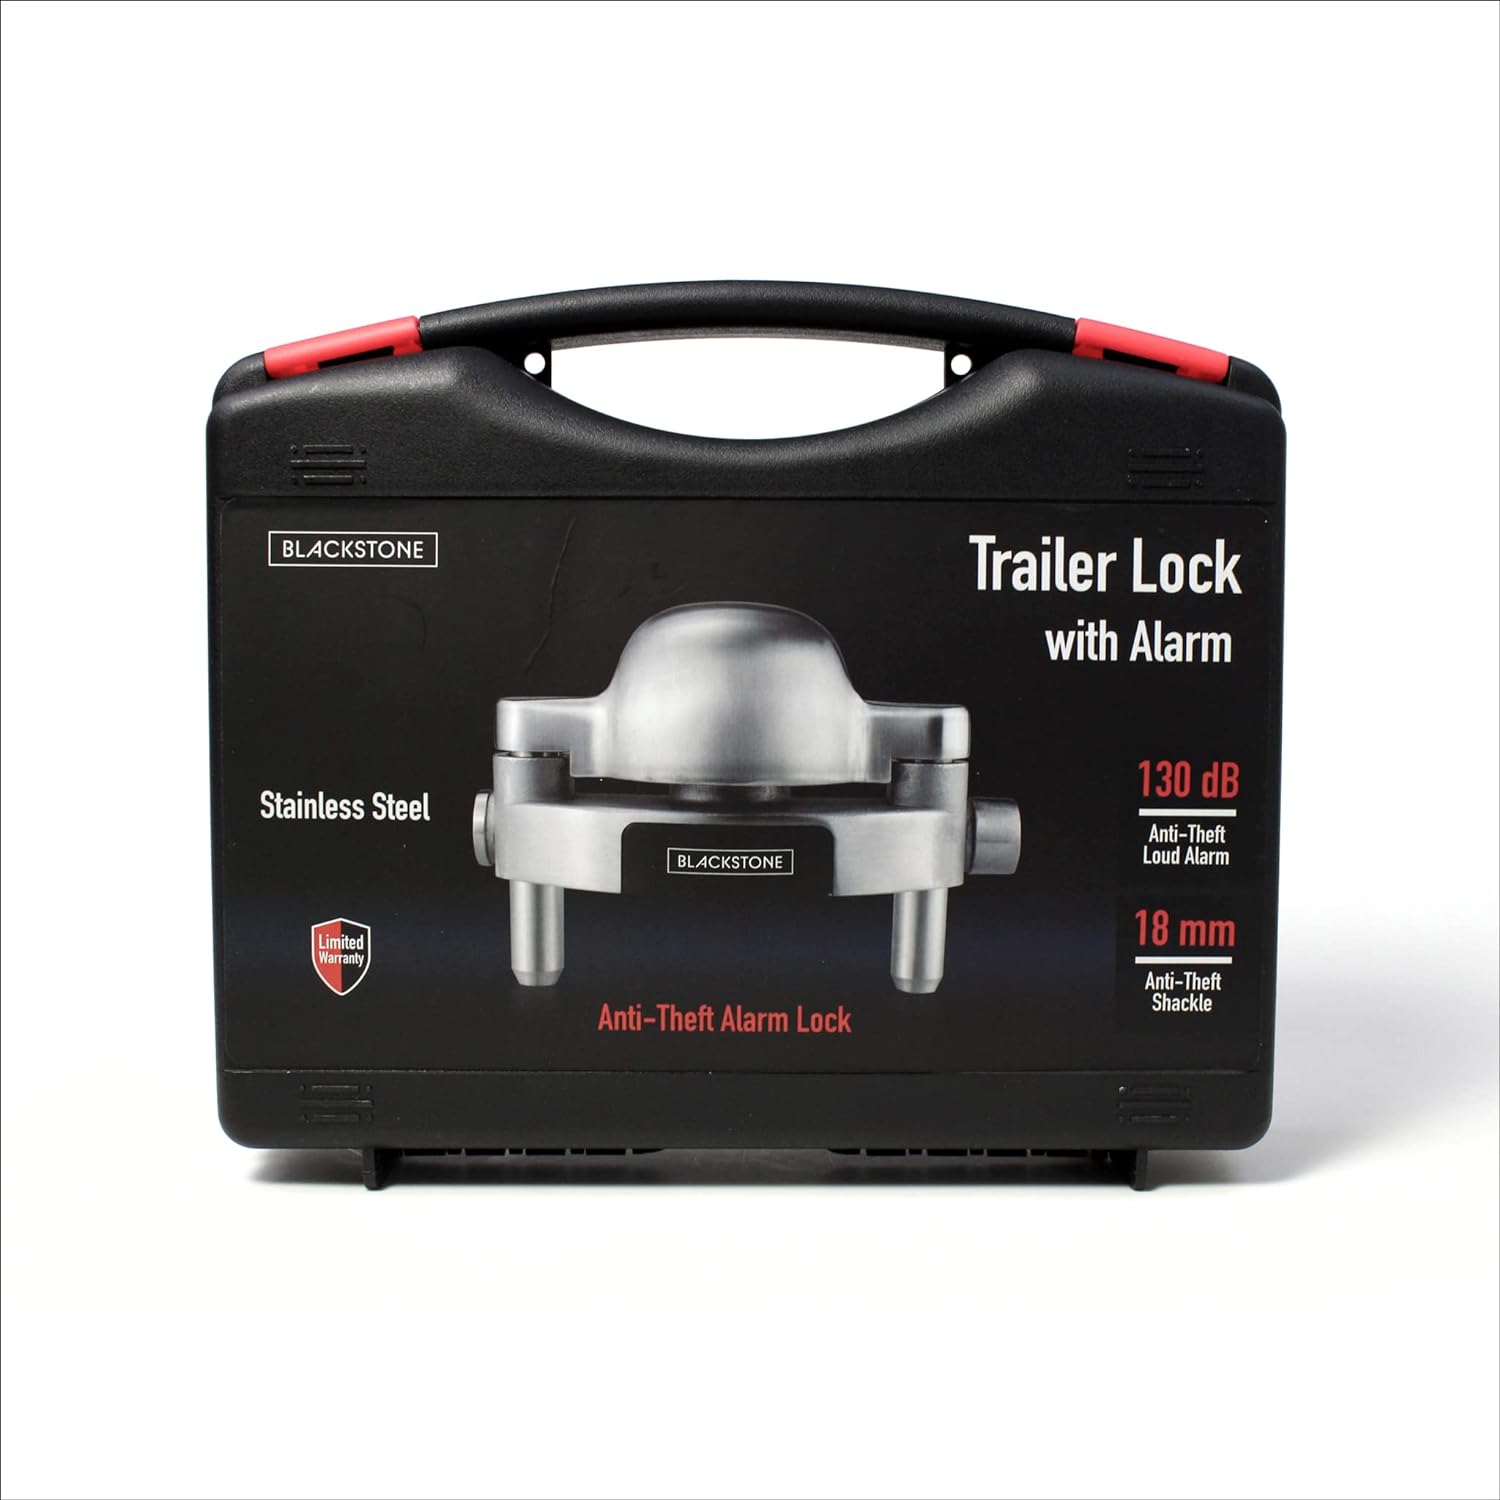 Black Stone Trailer Lock with Alarm product packaging, featuring a stainless steel anti-theft lock displayed on the front with '130 dB' and '18 mm Anti-Theft Shackle' highlighted, against a black carrying case